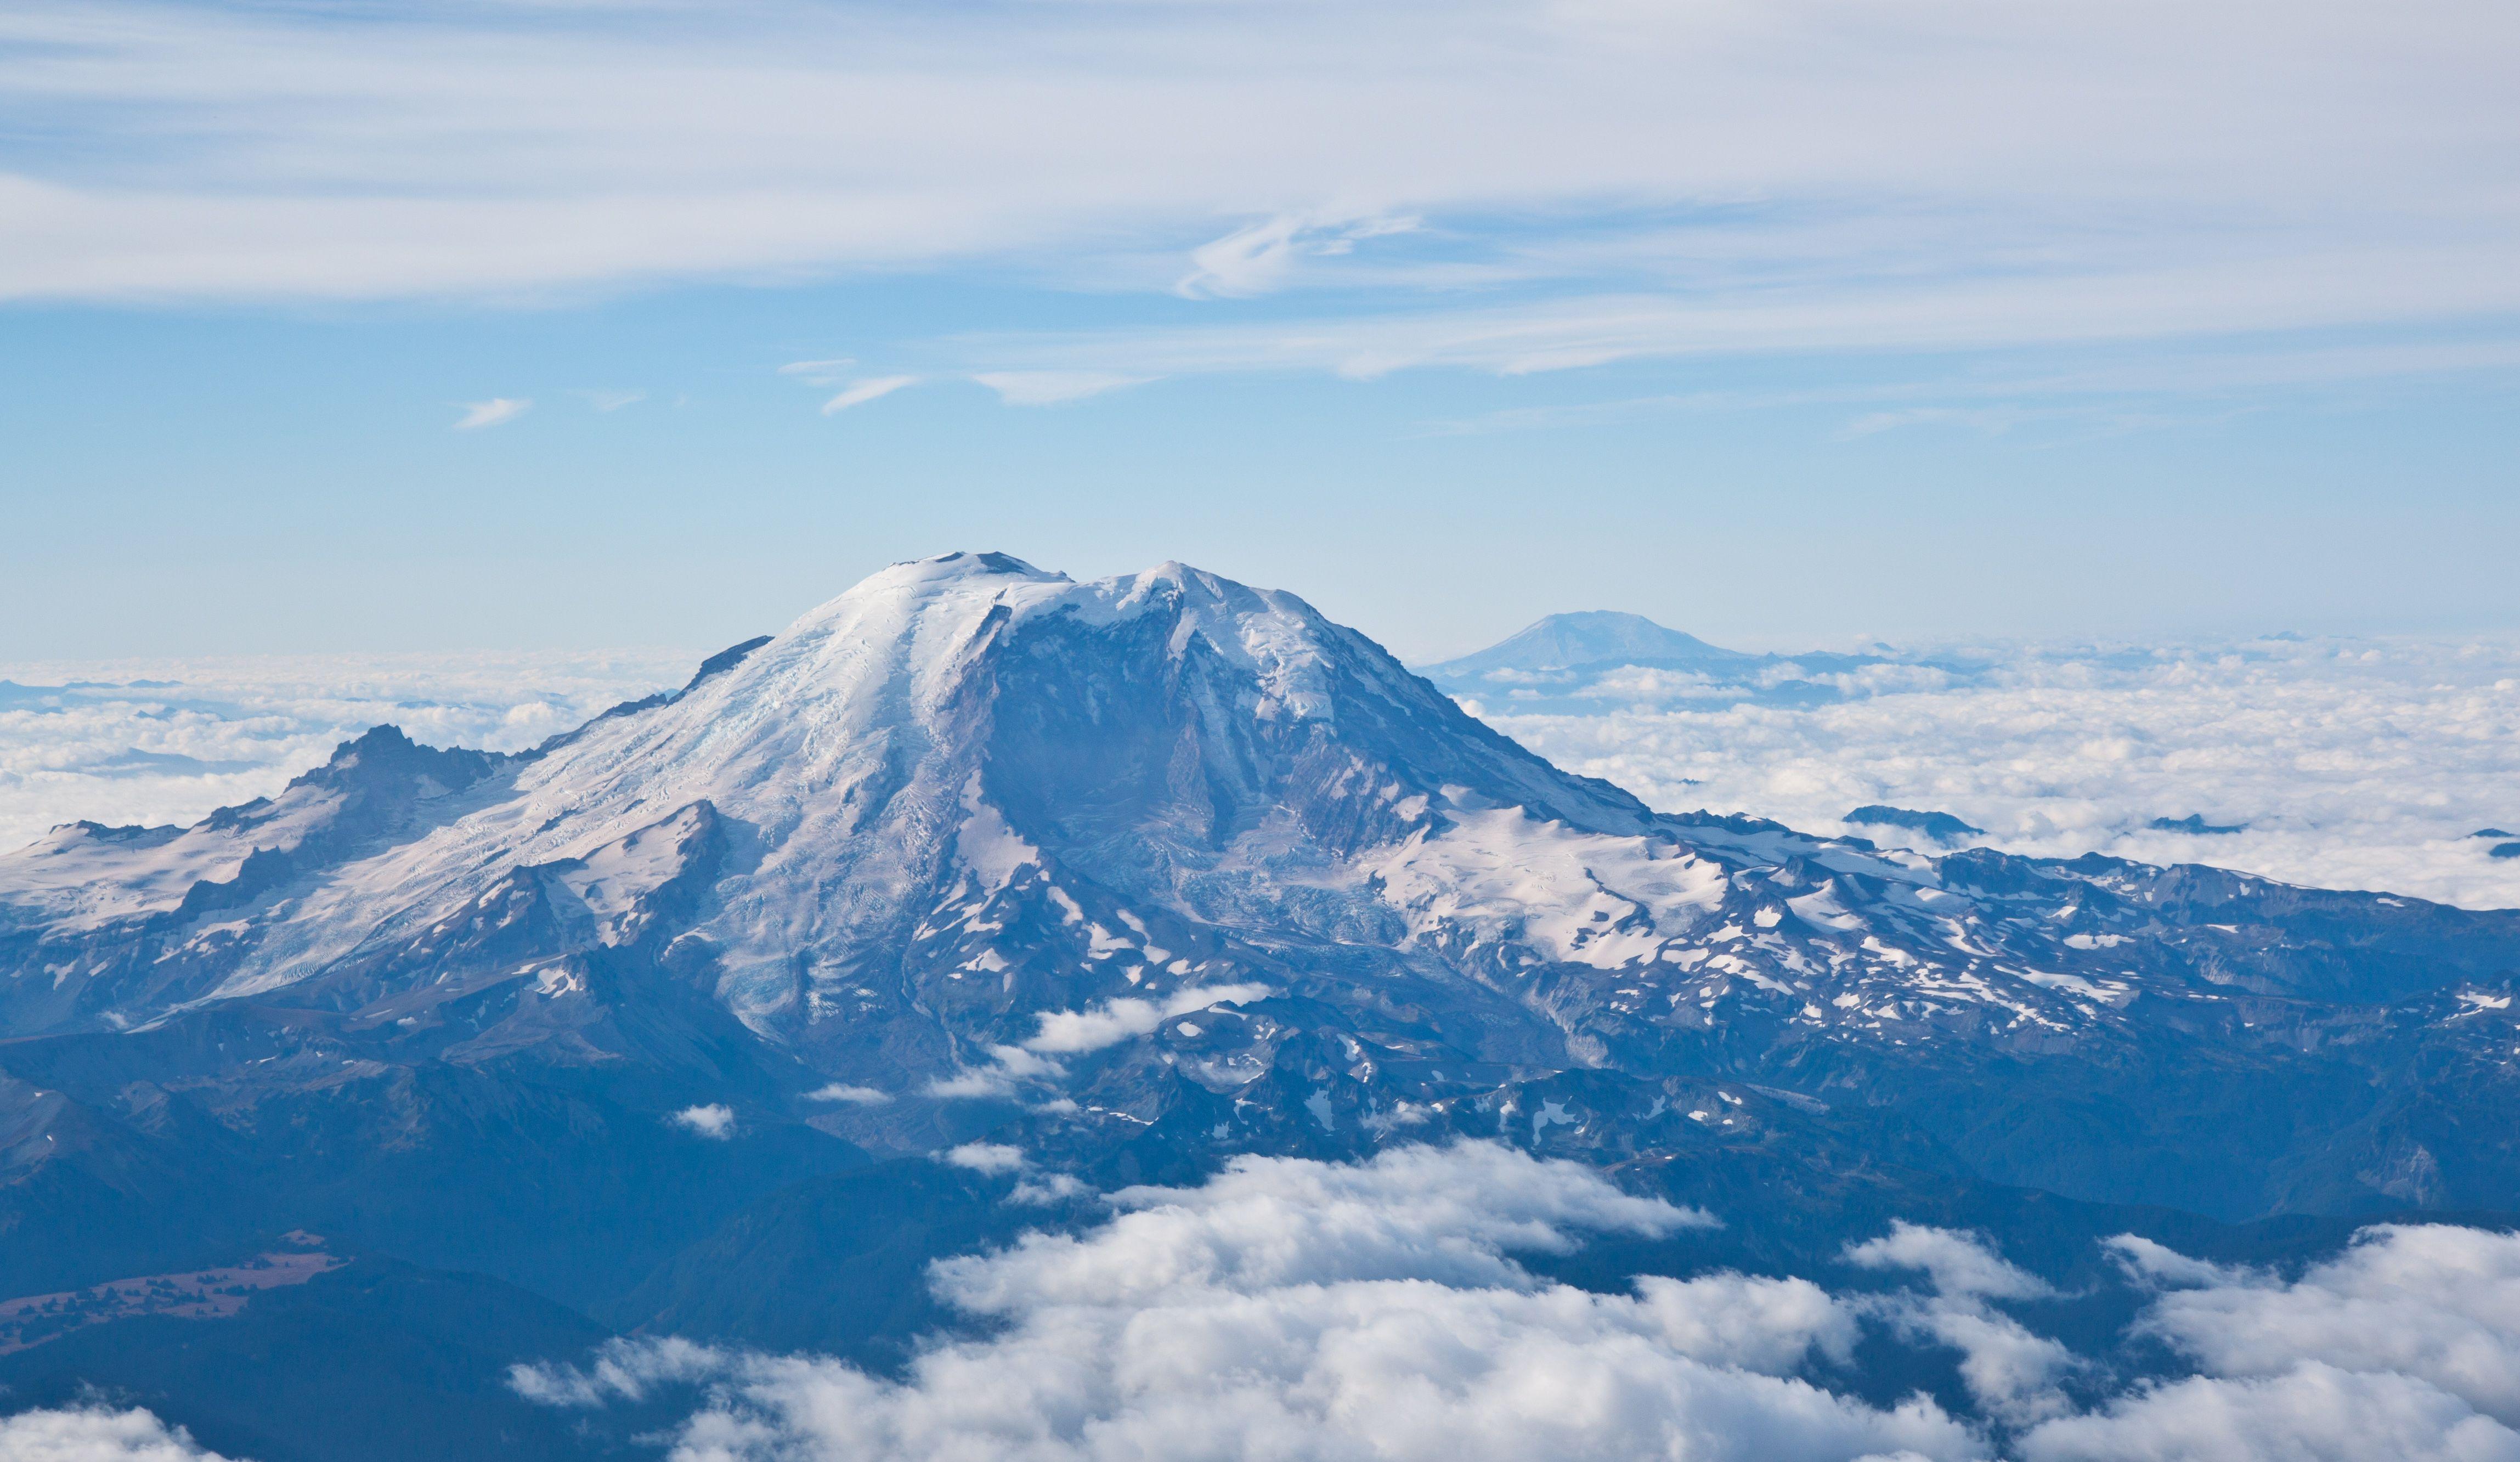 Mt Rainier with Mount St. Helens at the